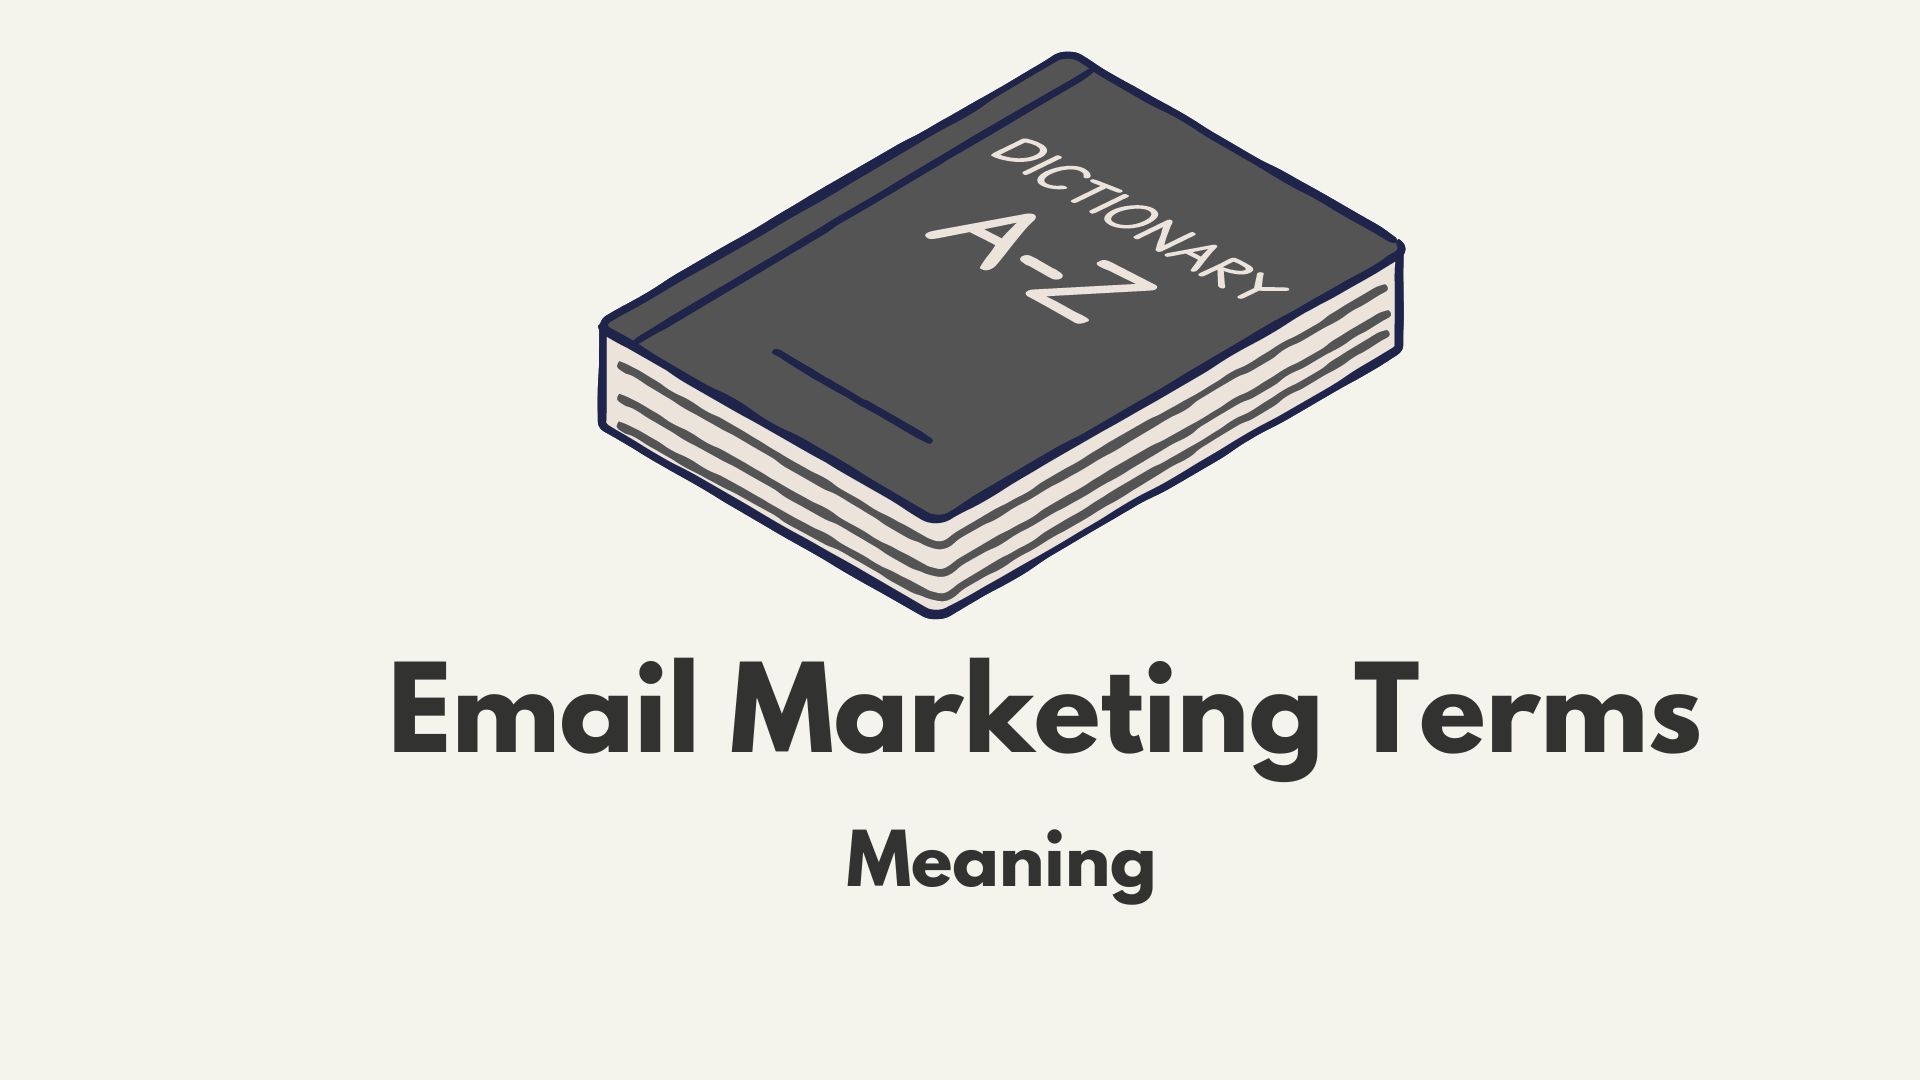 Email Marketing Terms Defined in Simple Words